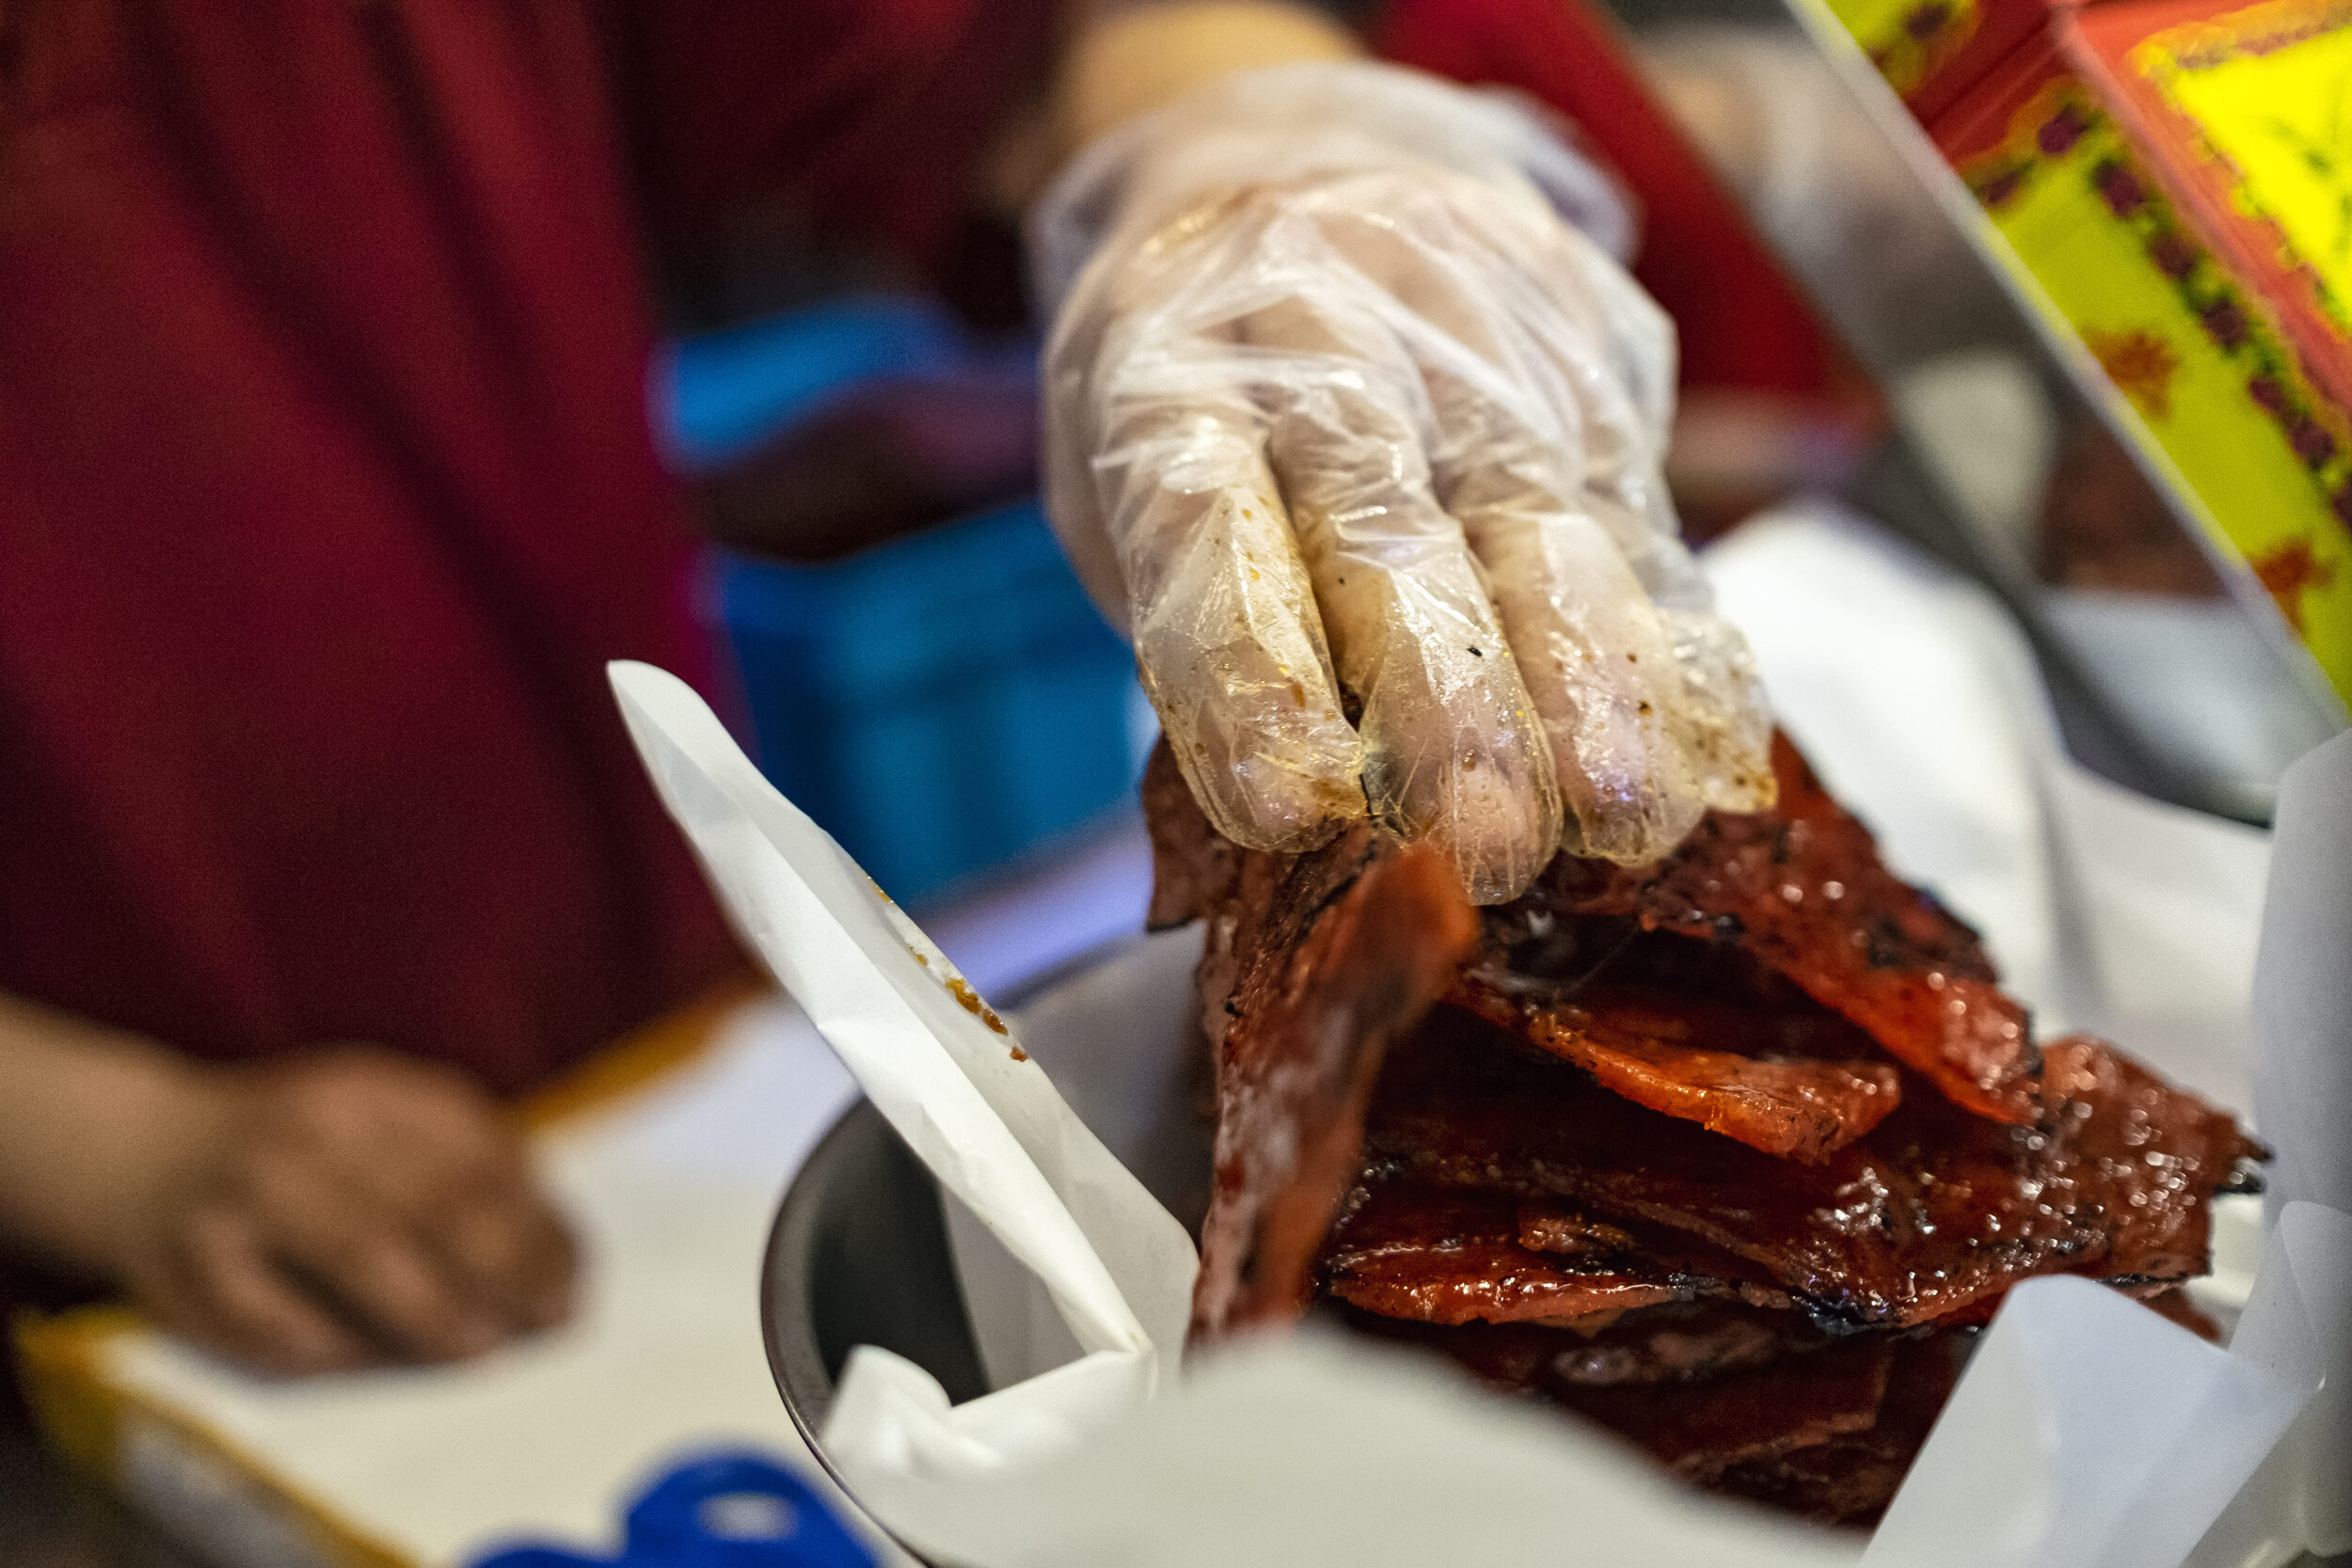  Second generation owner Ng Thian Beng, whose father founded Bak Kwa maker Kim Hua Guan in 1969, weighs a stack of Bak Kwa before packing them 